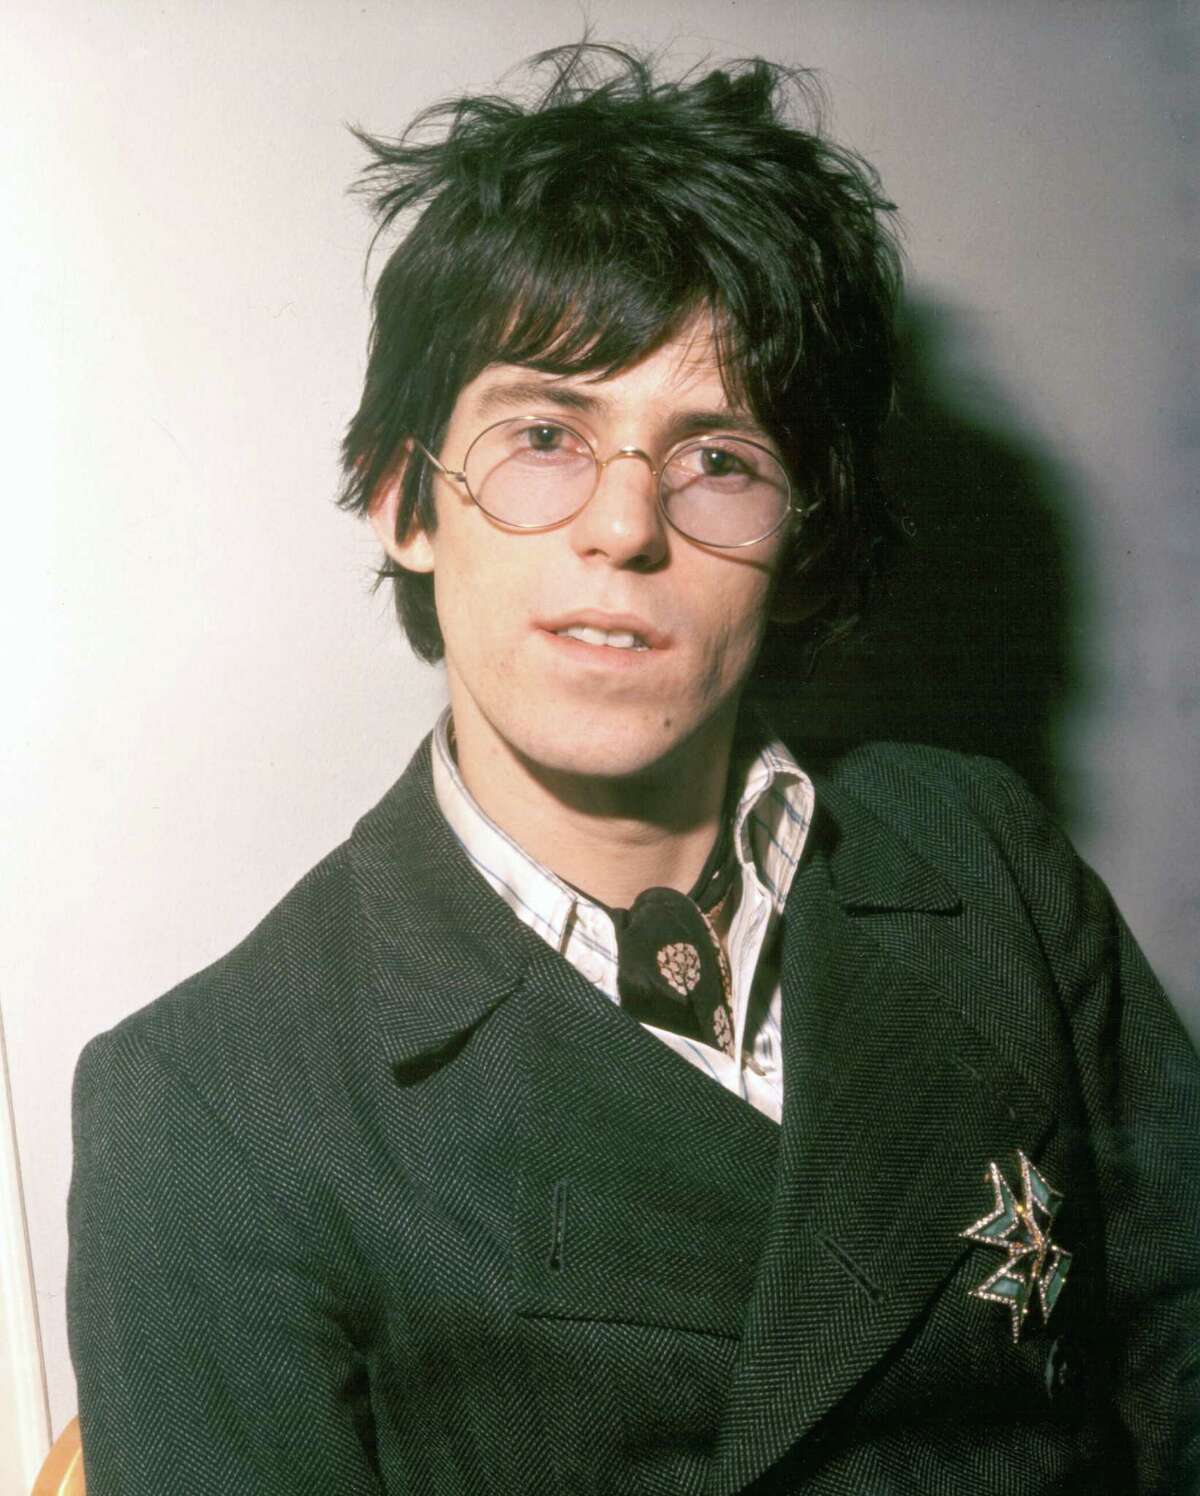 Keith Richards, then and now at 70